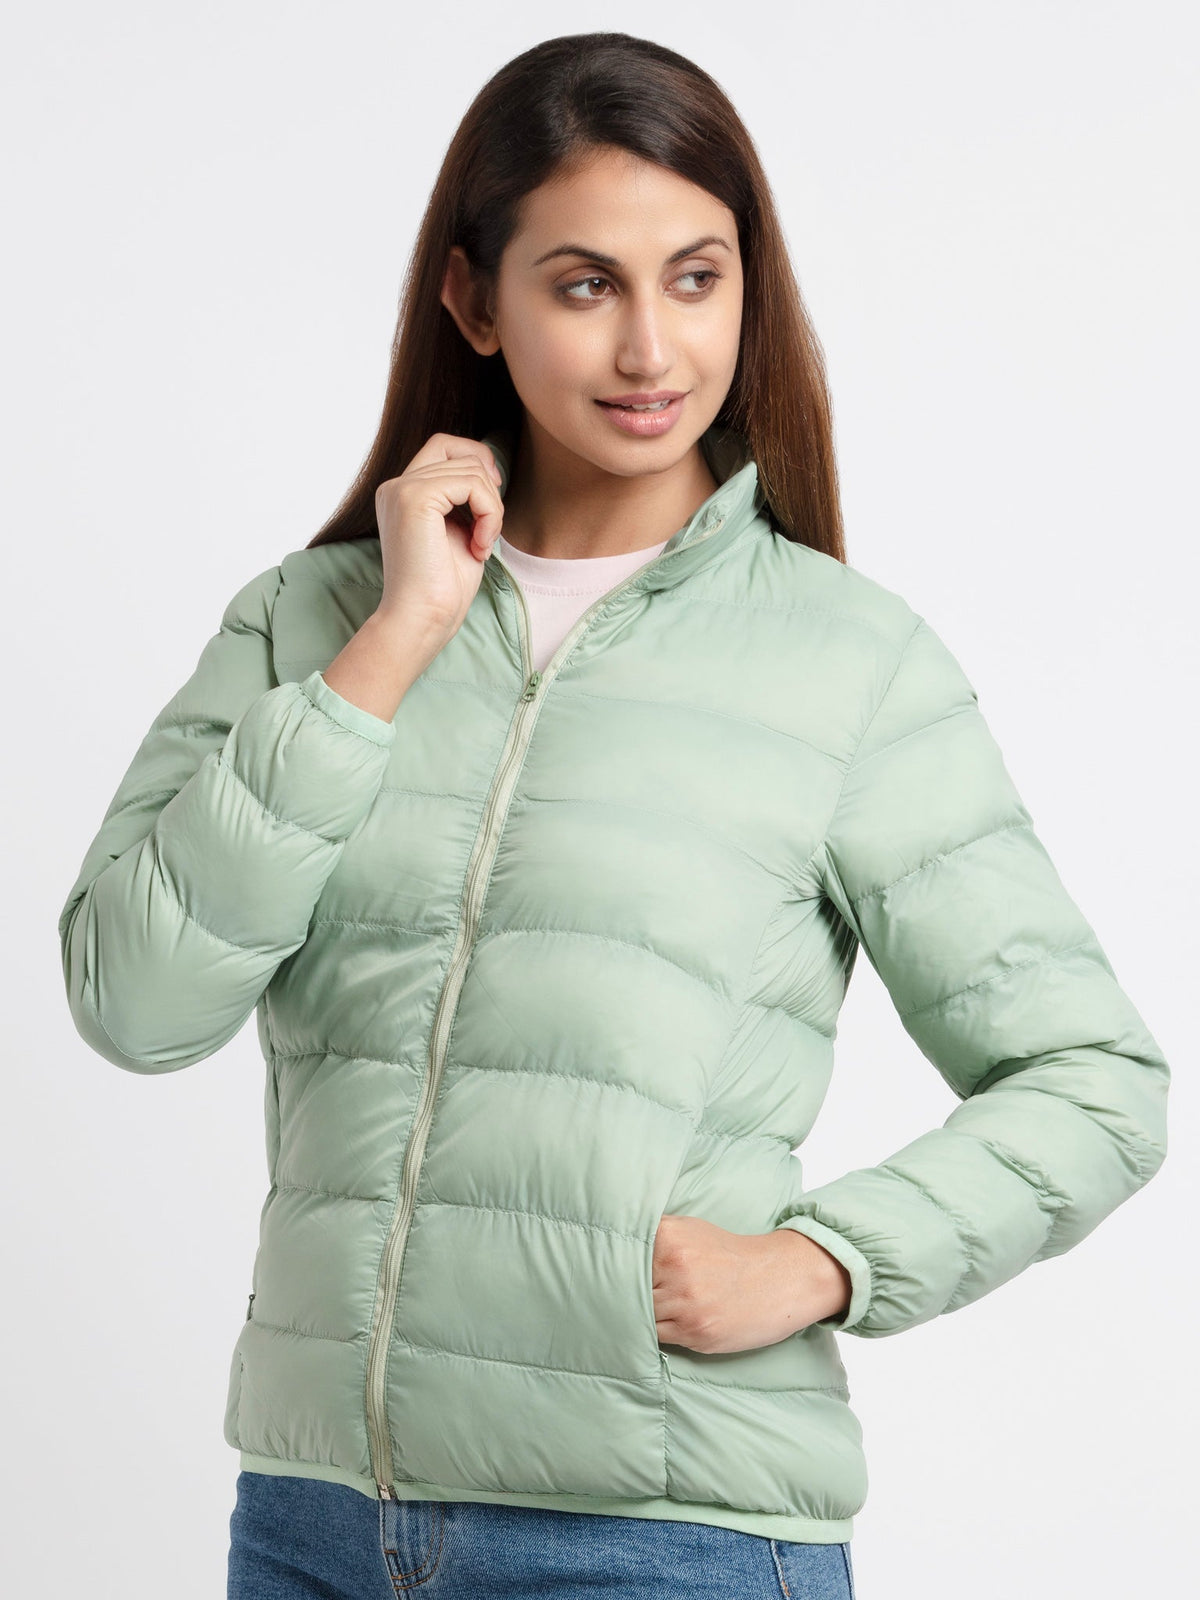 Women's's Quilted Lightweight Jacket With Pouch